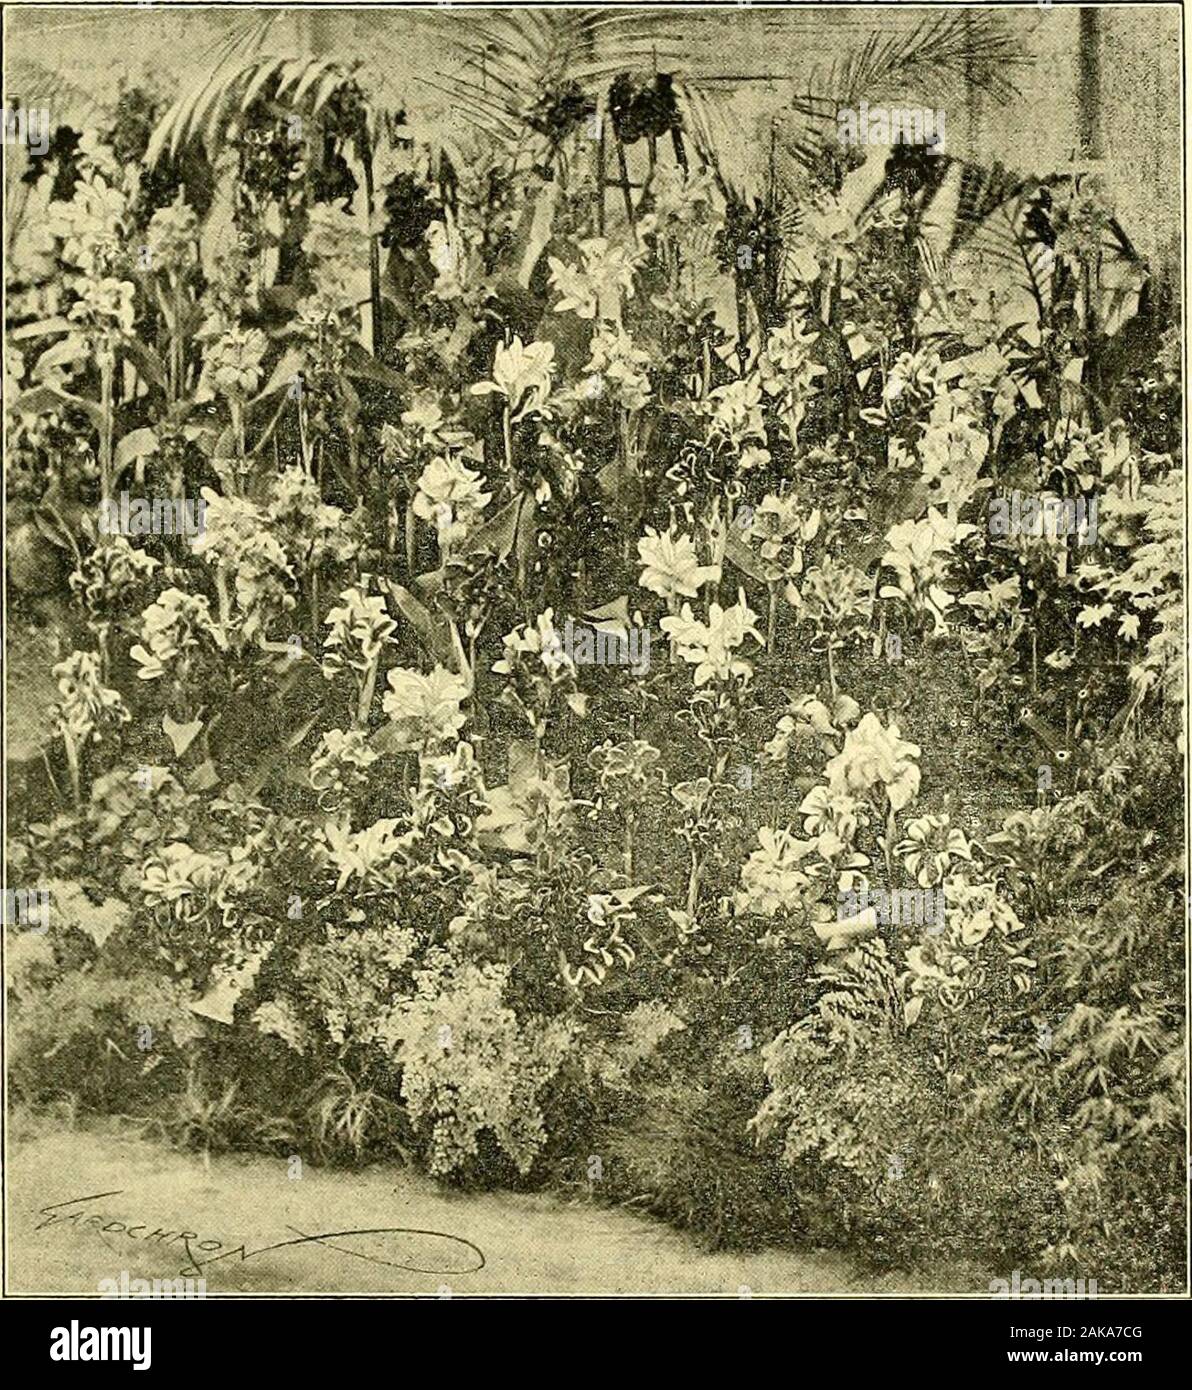 The Gardeners' chronicle : a weekly illustrated journal of horticulture and allied subjects . roots of the plant, andthen drains etill lower, when I stop the flow. Underthese conditions the plant flourishes, and has now twoflowers more or less like a Pinguicula. On the samebonk several plants of Schizocodon soldanelloides aregrowing. The leaves eeem to me even more beau-tiful than those of Galax or Shortia. Tho plants havegone without protection through two winters, butthey have both been mild ones. Can any one do any burn flower garden, the many fine trees in the parkand on the estate general Stock Photo